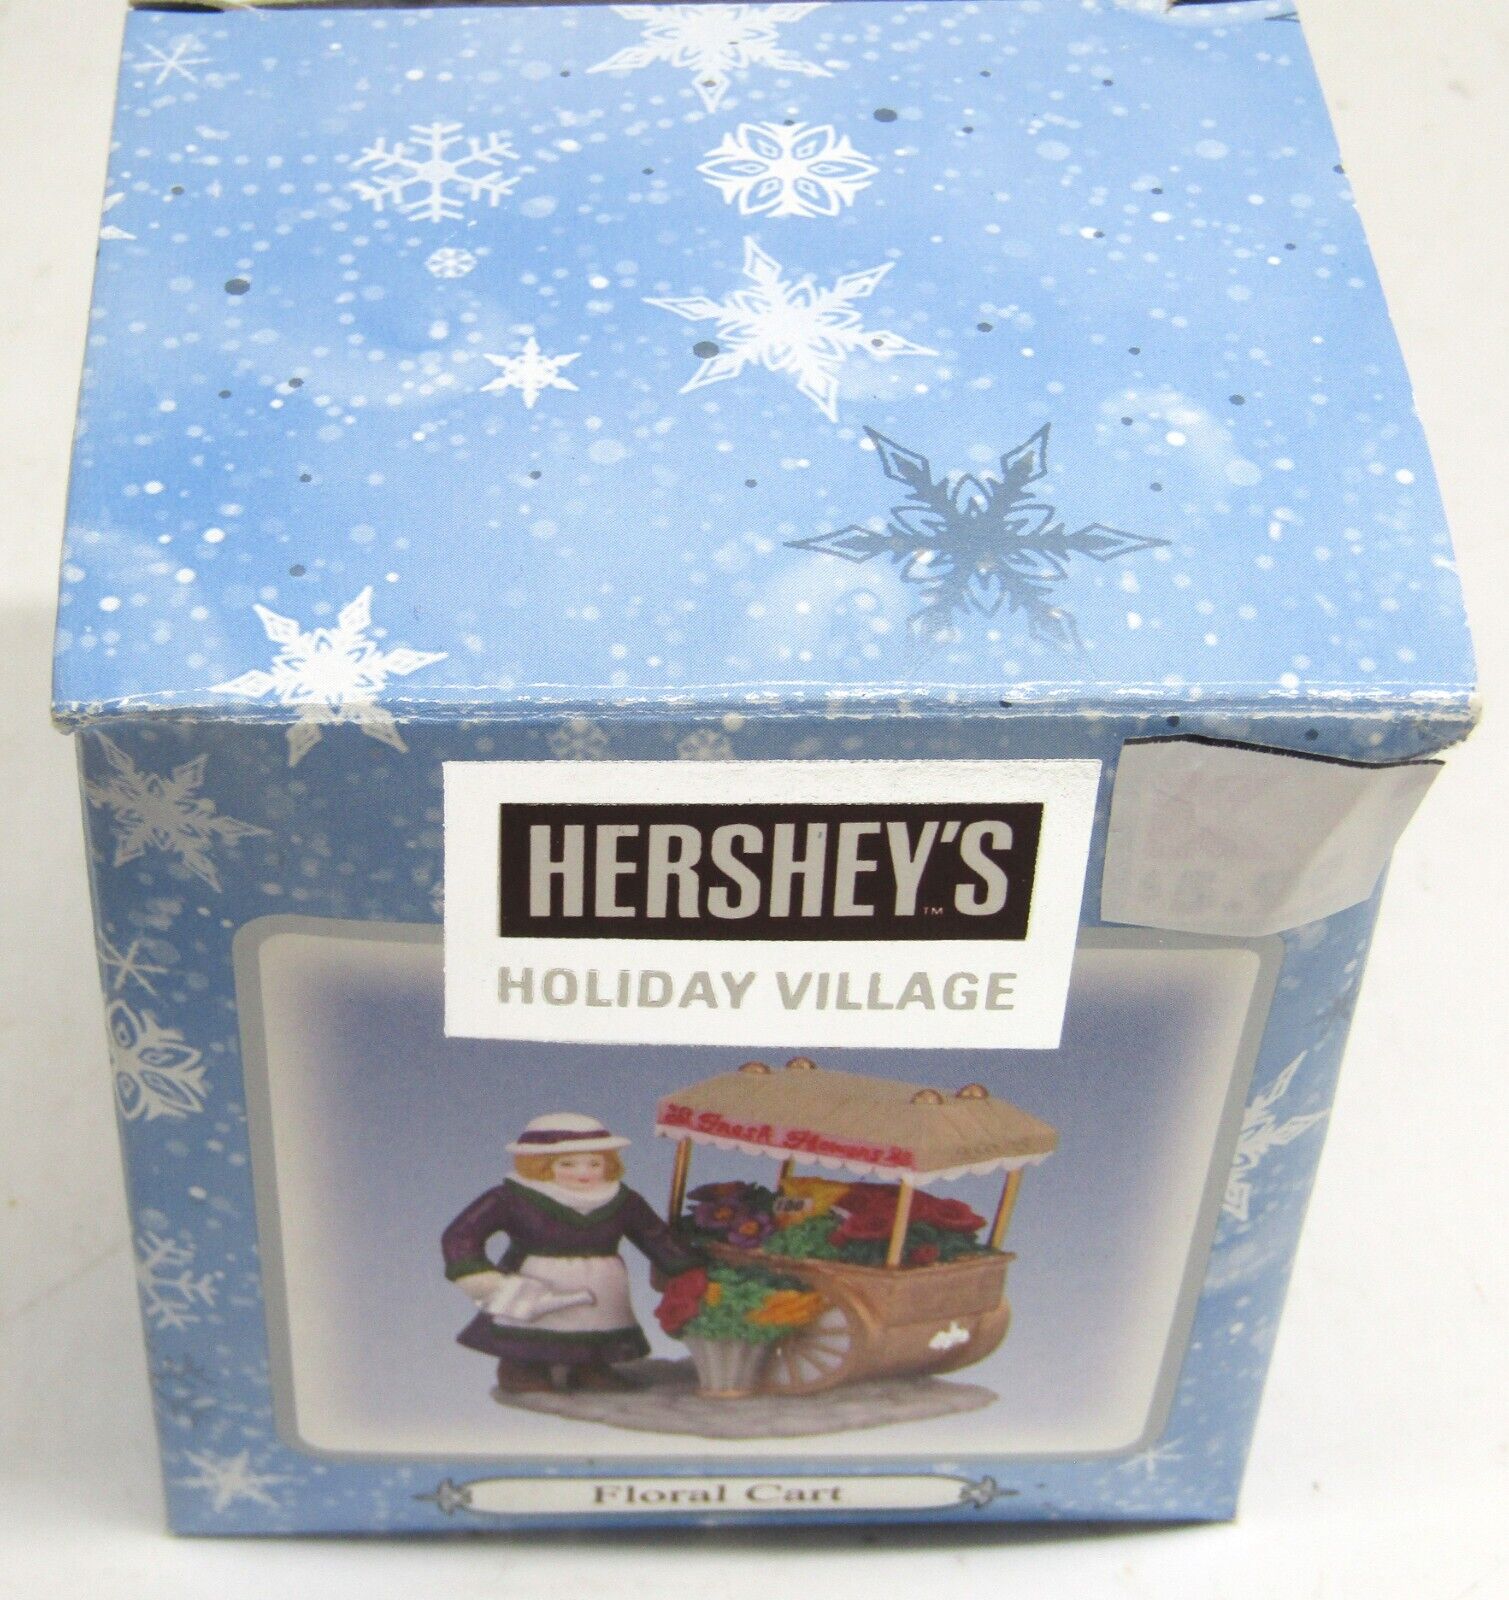 Hershey's Holiday Village Floral Cart Christmas Figurine